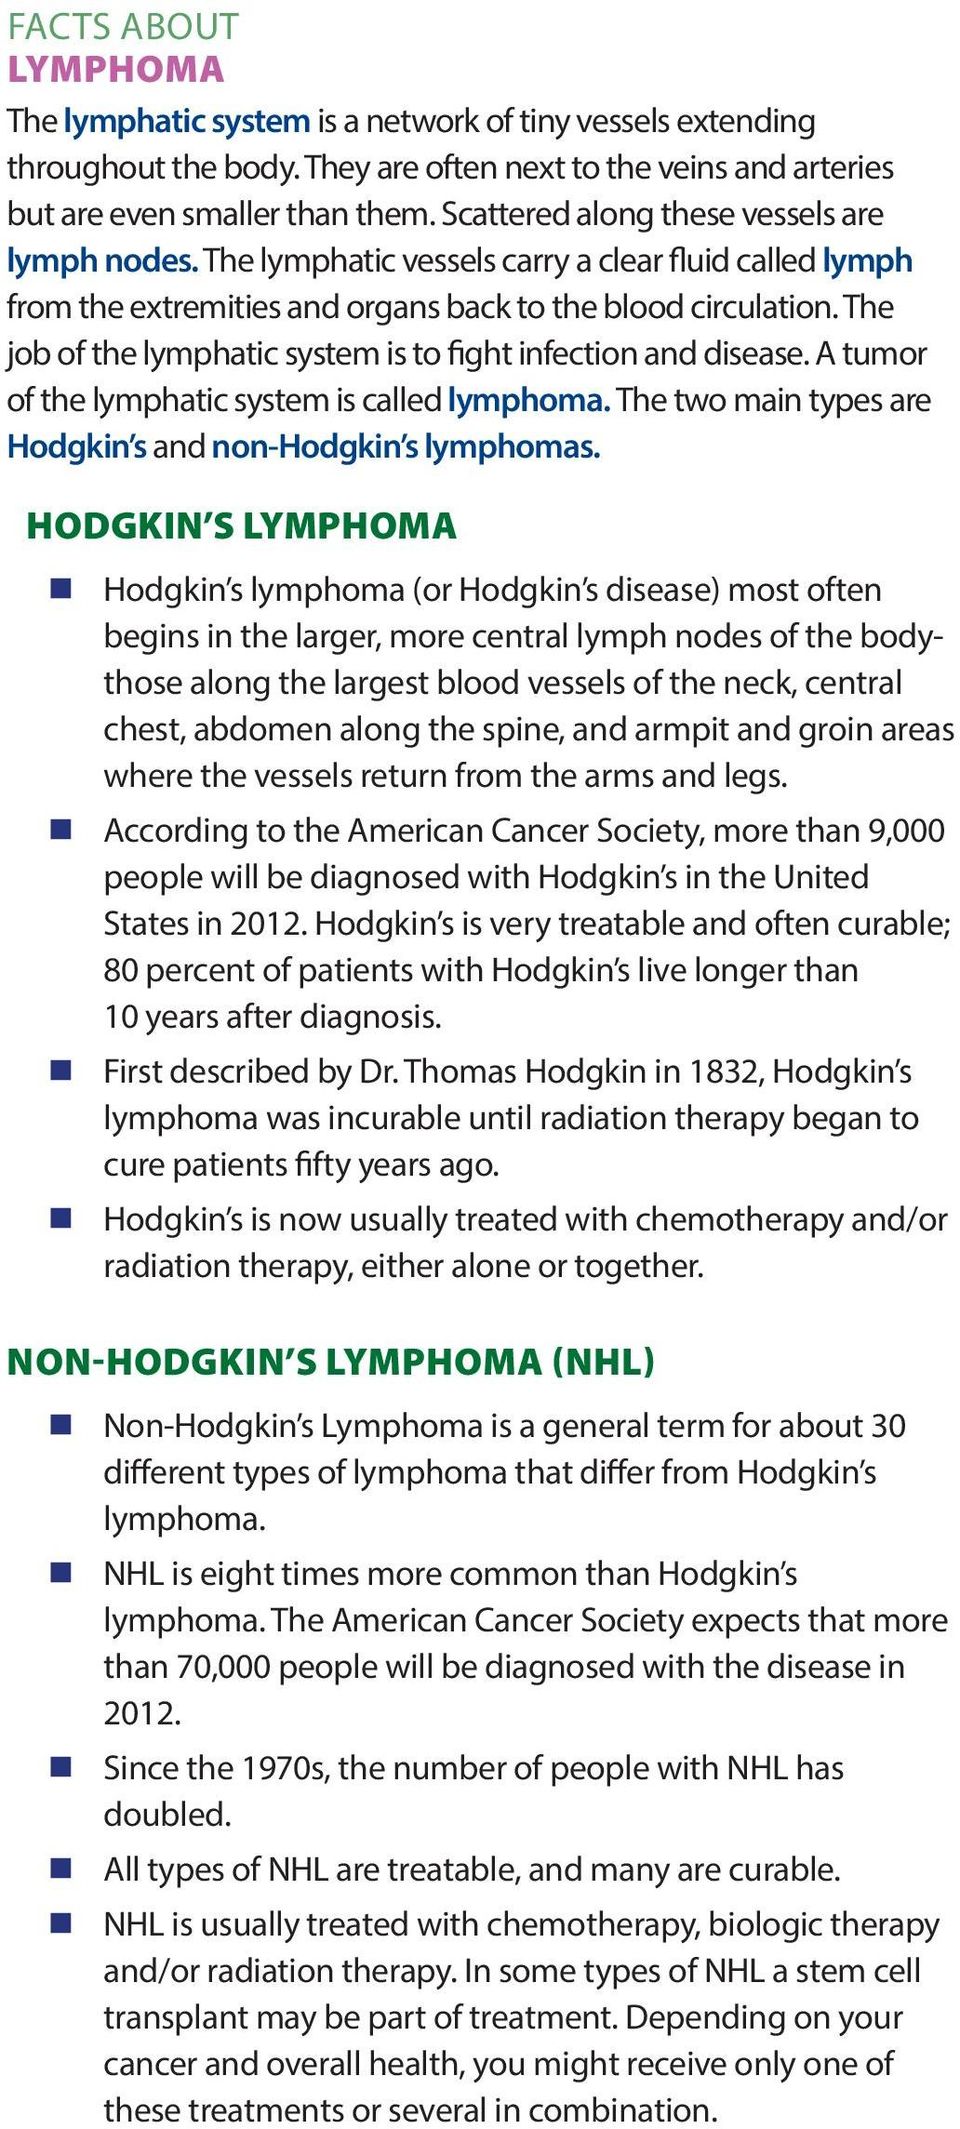 The job of the lymphatic system is to fight infection and disease. A tumor of the lymphatic system is called lymphoma. The two main types are Hodgkin s and non-hodgkin s lymphomas.